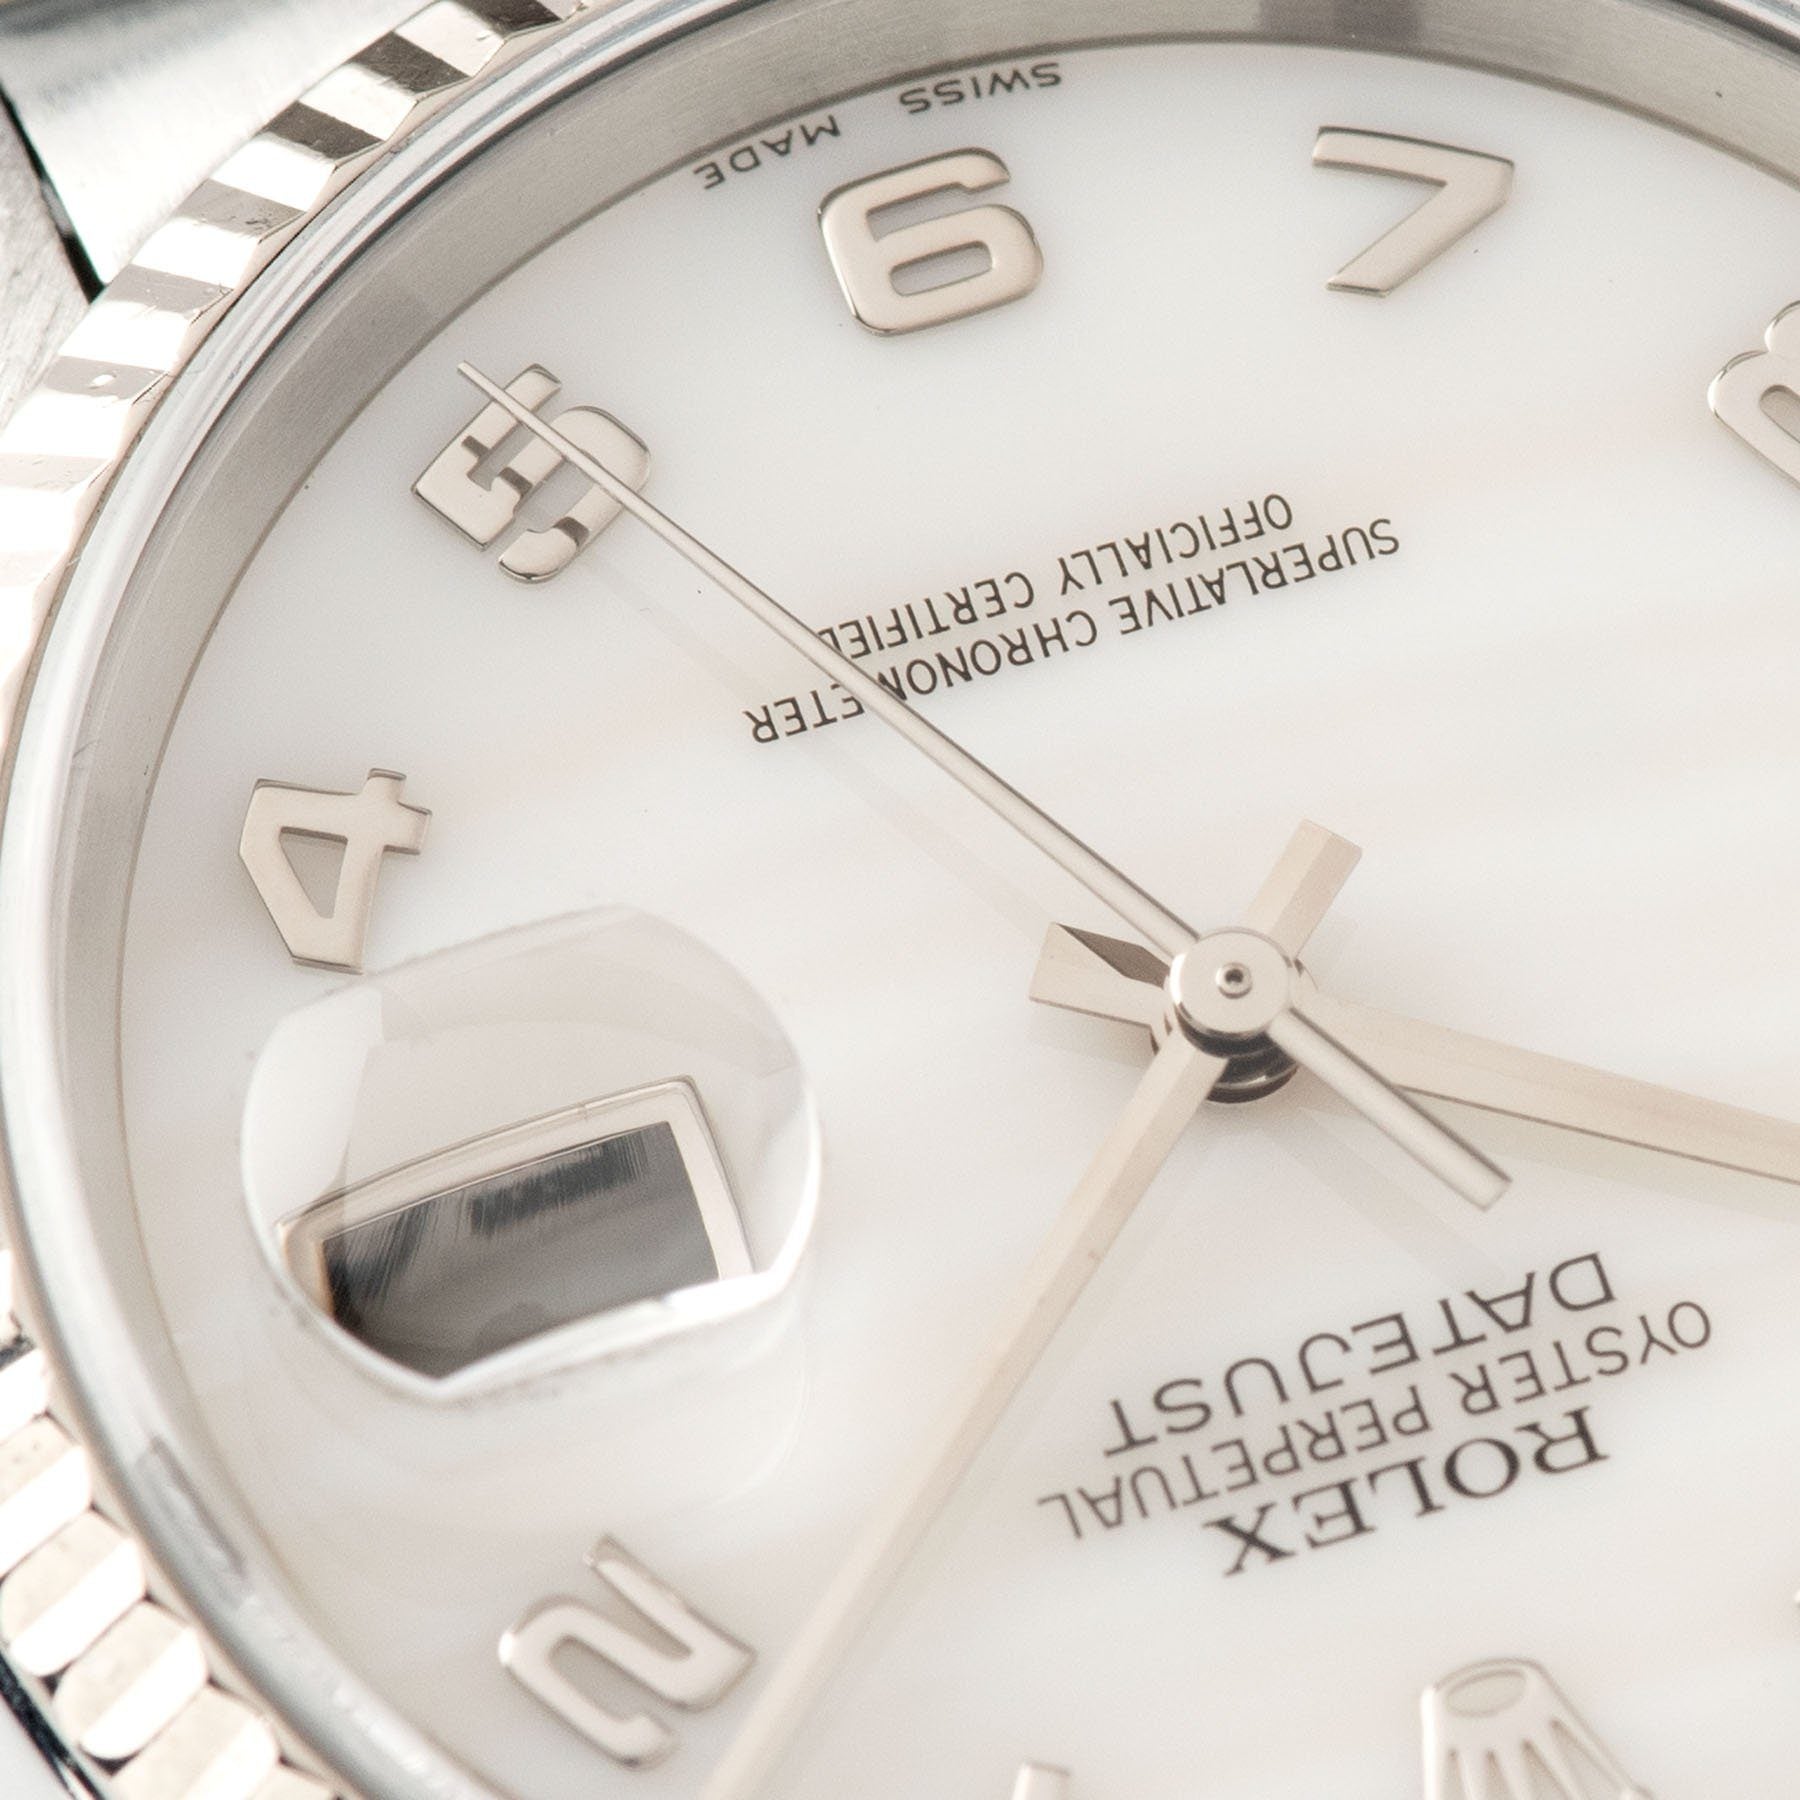 Rolex Datejust White Mother of Pearl Dial Reference 16234